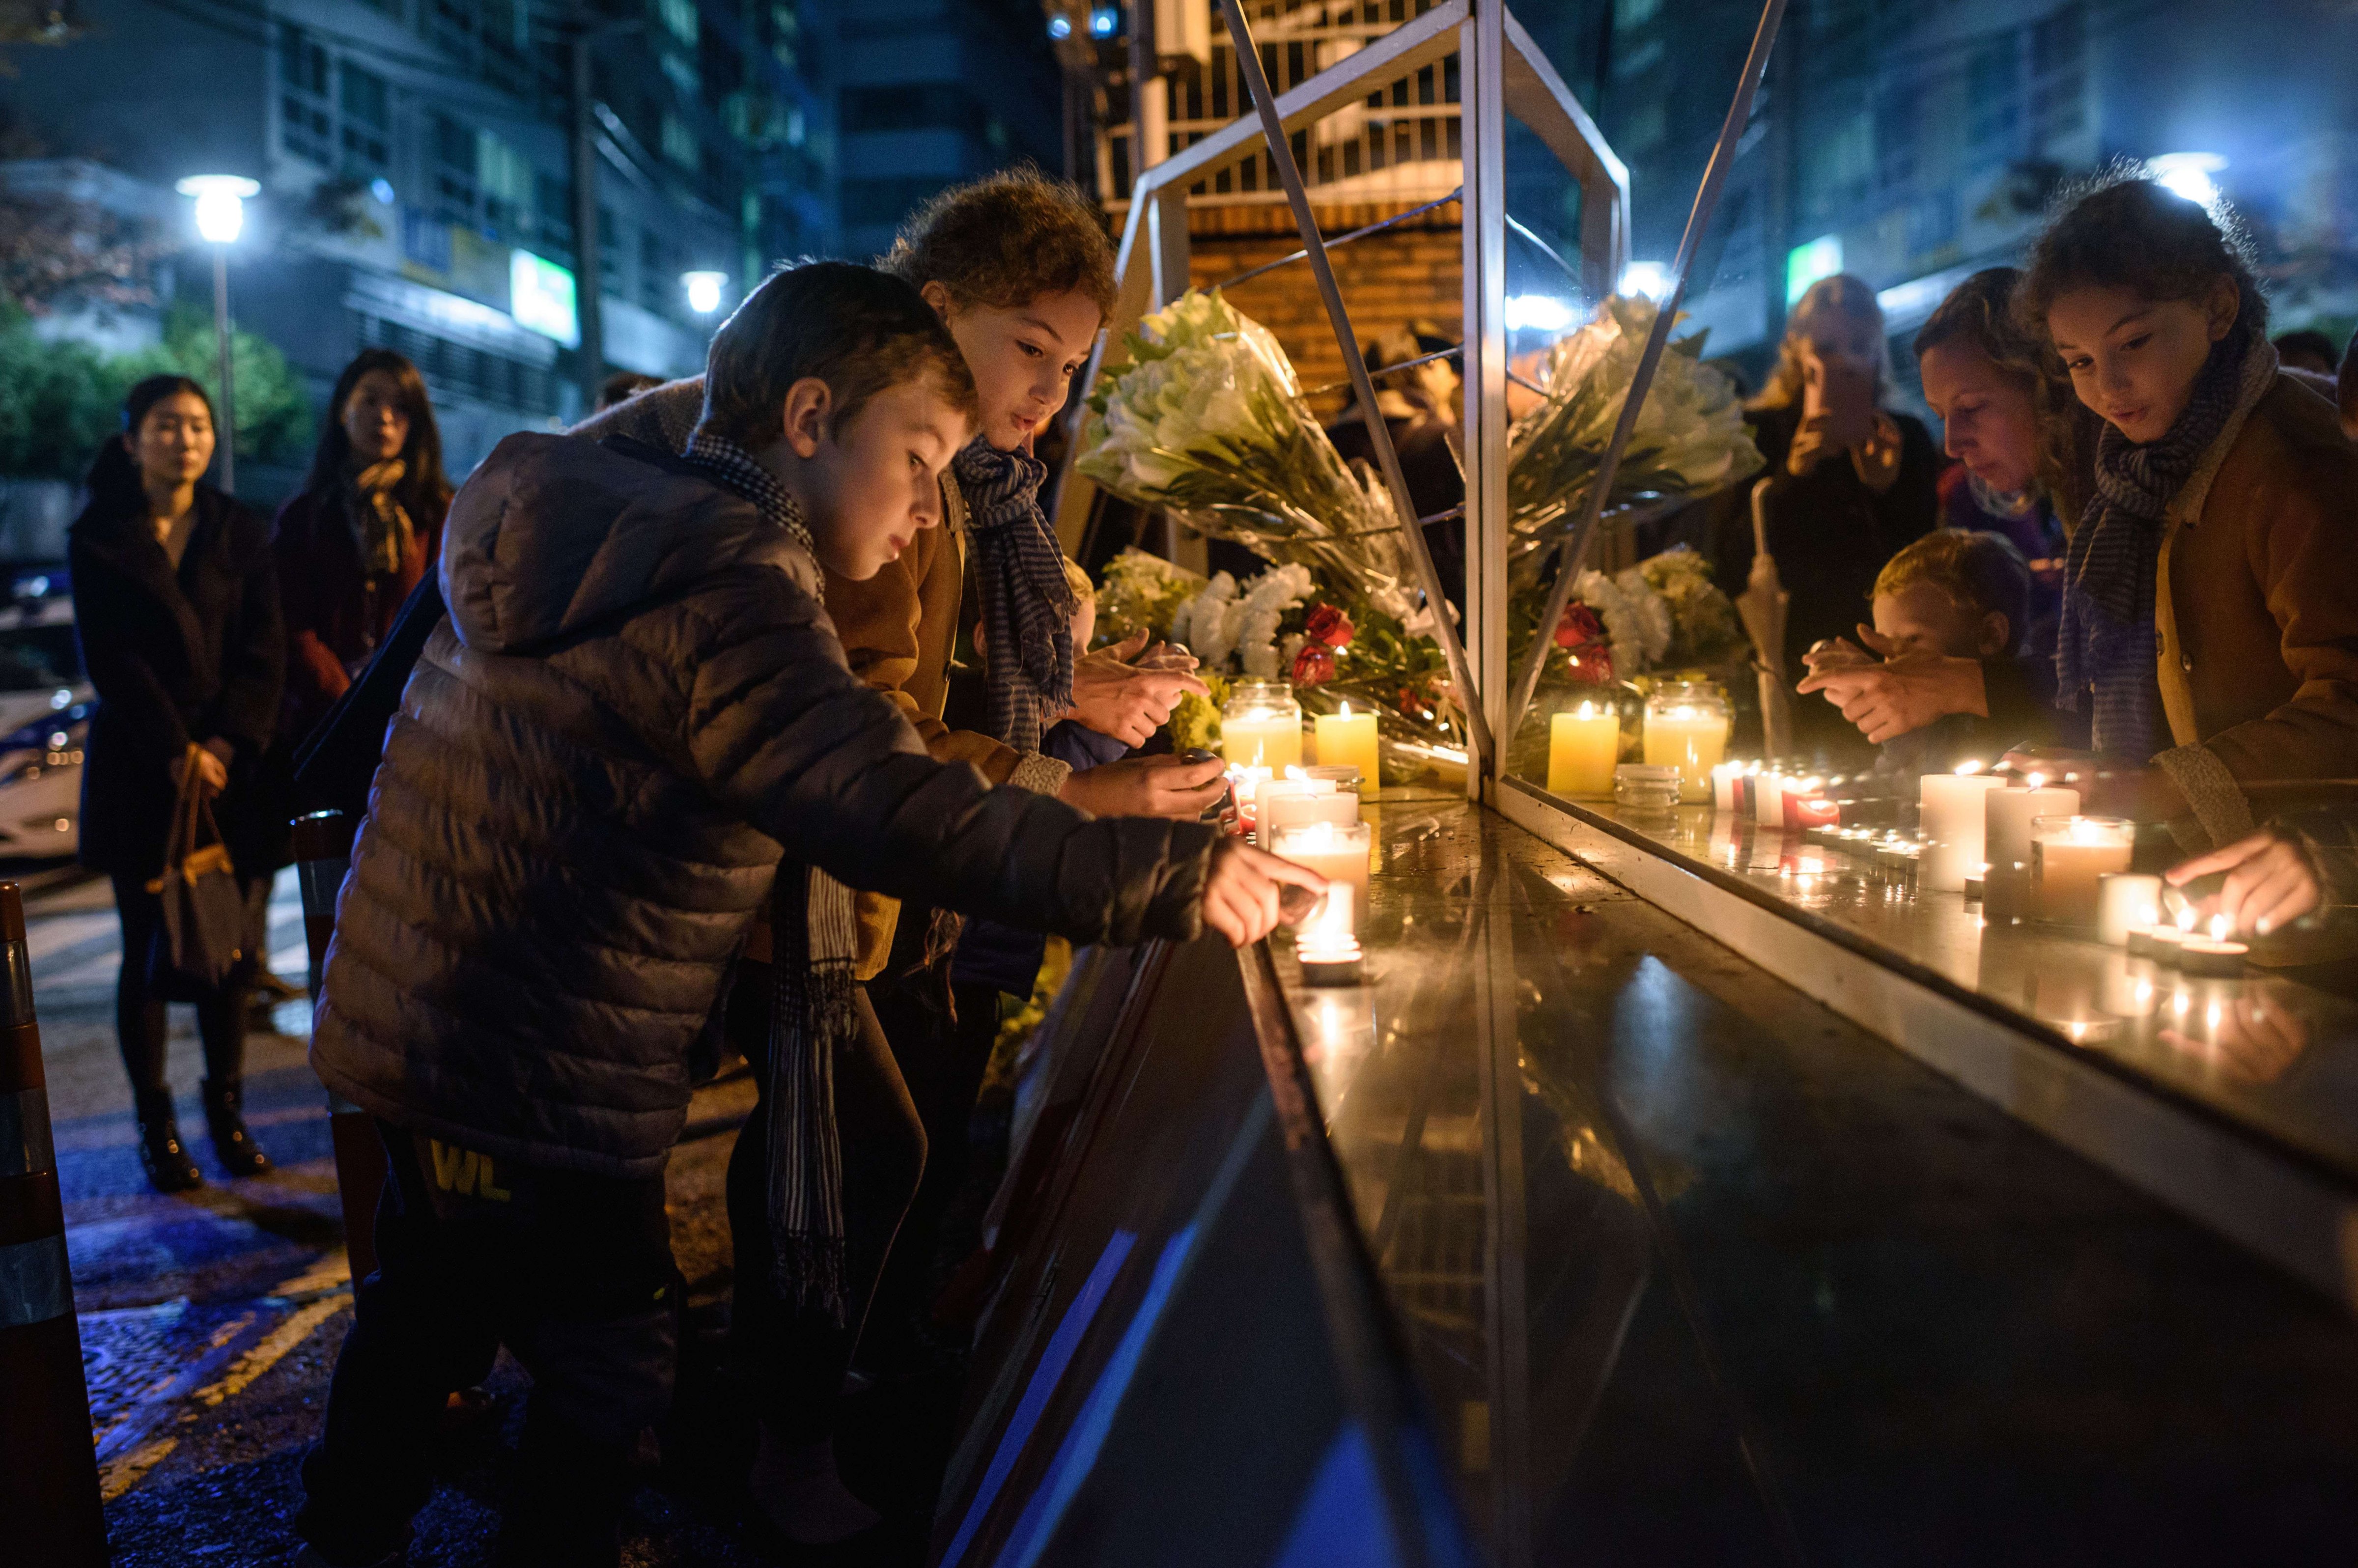 Members of the French community living in South Korea light candles at a vigil outside the French embassy in Seoul on Nov. 14, 2015. (Ed Jones—AFP/Getty Images)